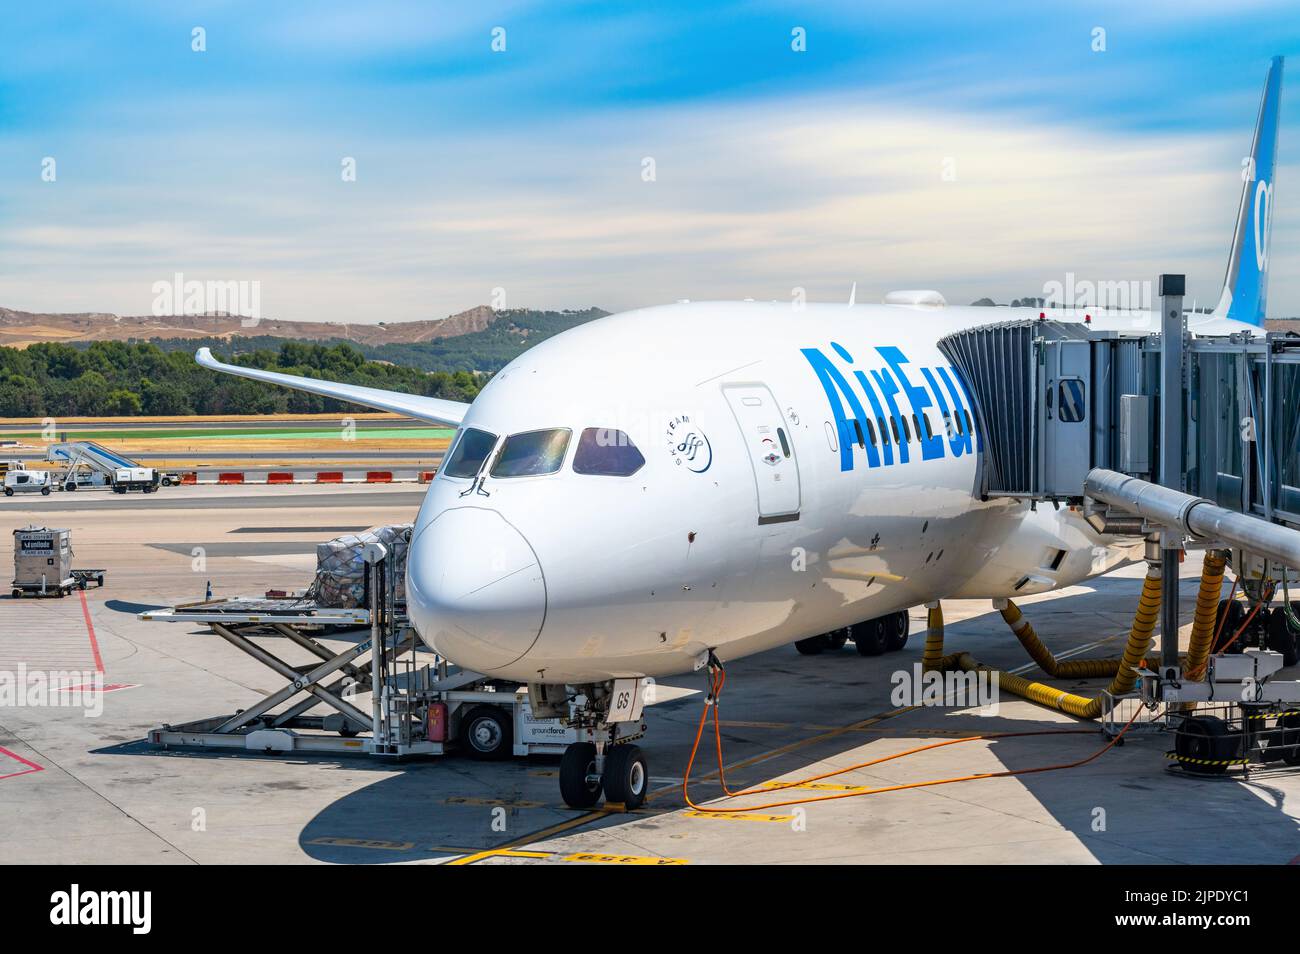 A Passenger Boarding Bridge (PBB) which is also known as an air bridge or jet bridge is attached to an Air Europa plane in a Spanish airport Stock Photo